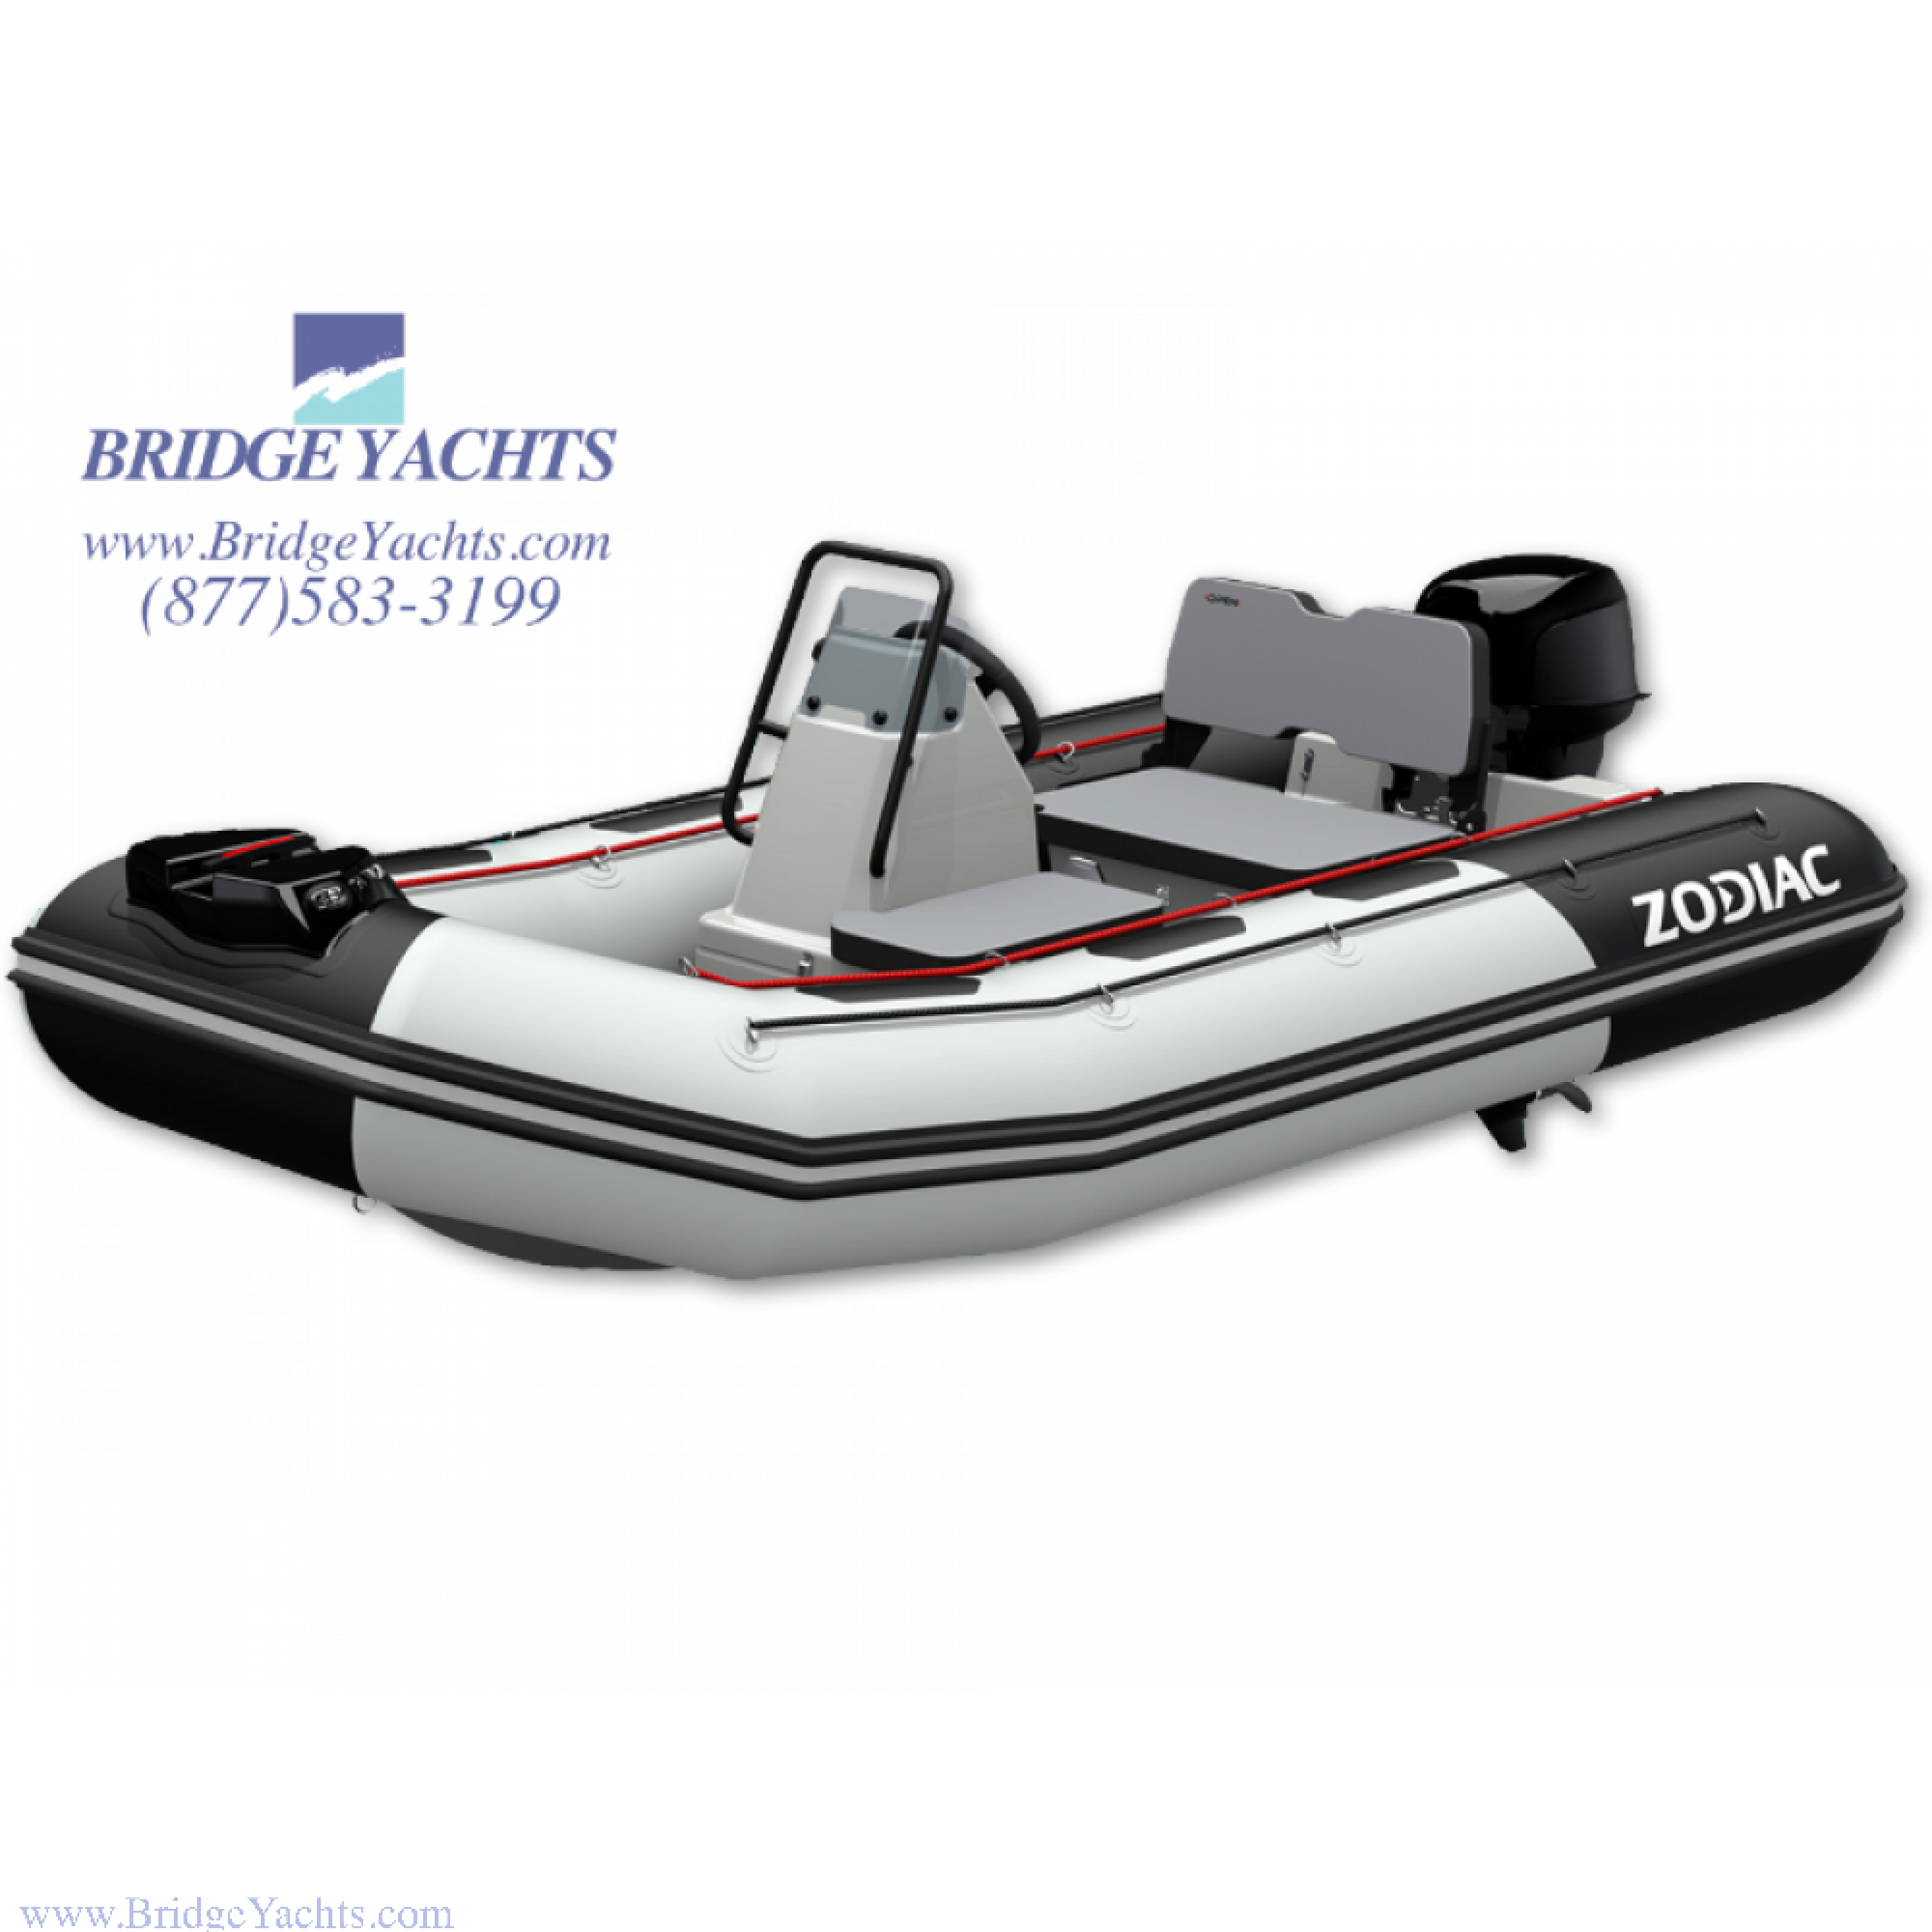 Zodiac Open 3.4 Inflatable Boat